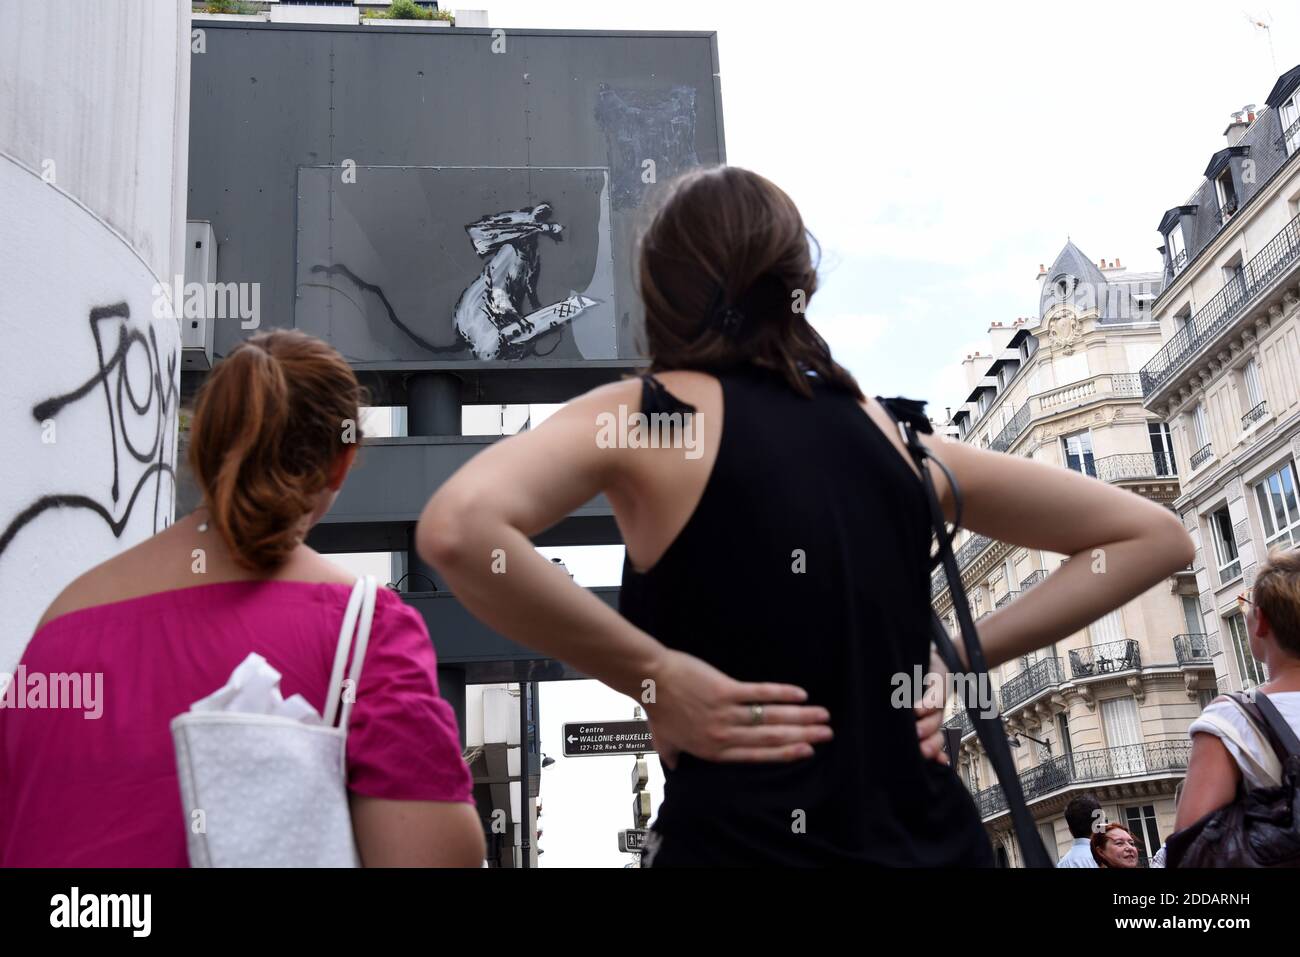 A recent artwork by street artist Banksy is pictured in Paris, France, on June 29, 2018, Street artist Banksy has confirmed that he 'blitzed' Paris with up to a dozen murals as a tribute to the May 1968 uprising and even taking aim at the French government's hard line on migrants. Stencilled images in the style of the mysterious British graffiti star began appearing on walls across the French capital last week. Photo by Alain Apaydin/ABACAPRESS.COM Stock Photo